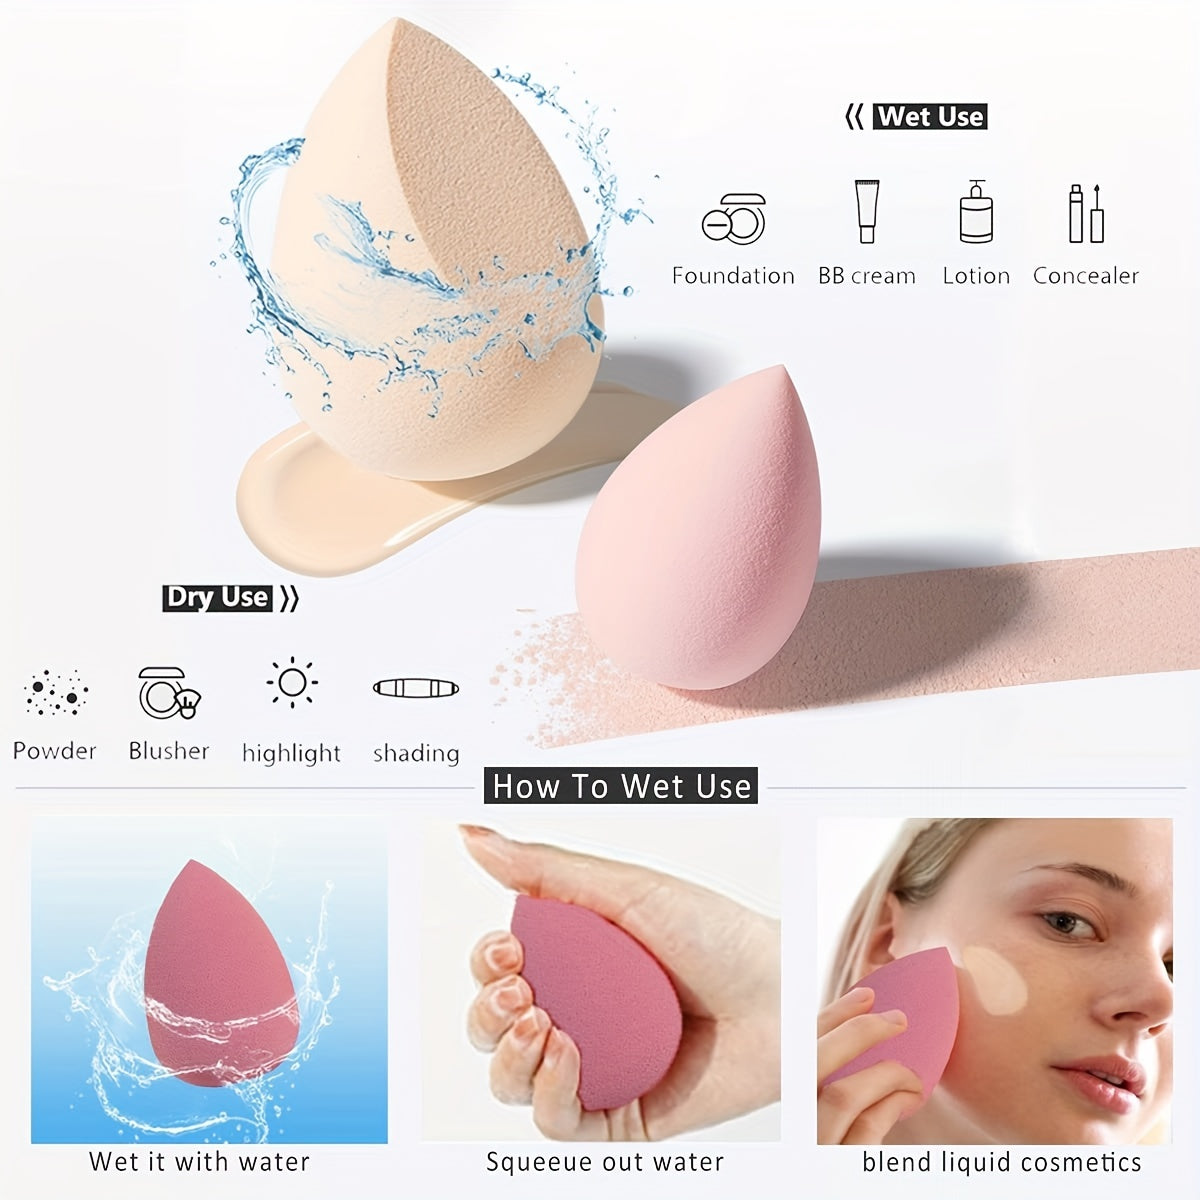 Professional Makeup - Latex-Free - Dry And Wet Use - Blender for Foundation